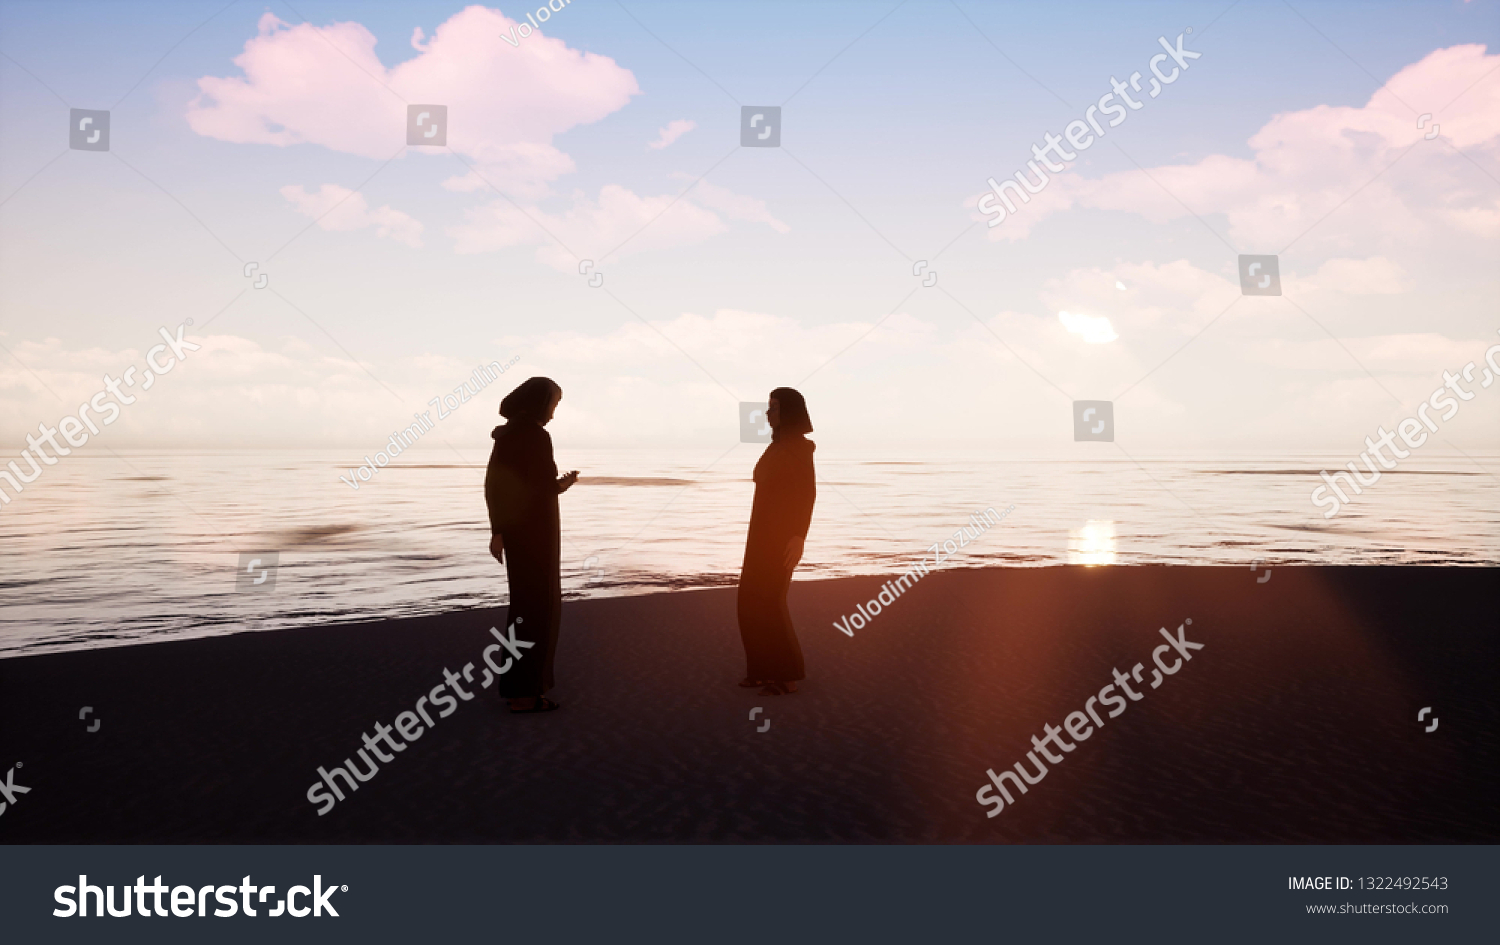 Two women in hijabs talking to each other by the ocean 3d render #1322492543